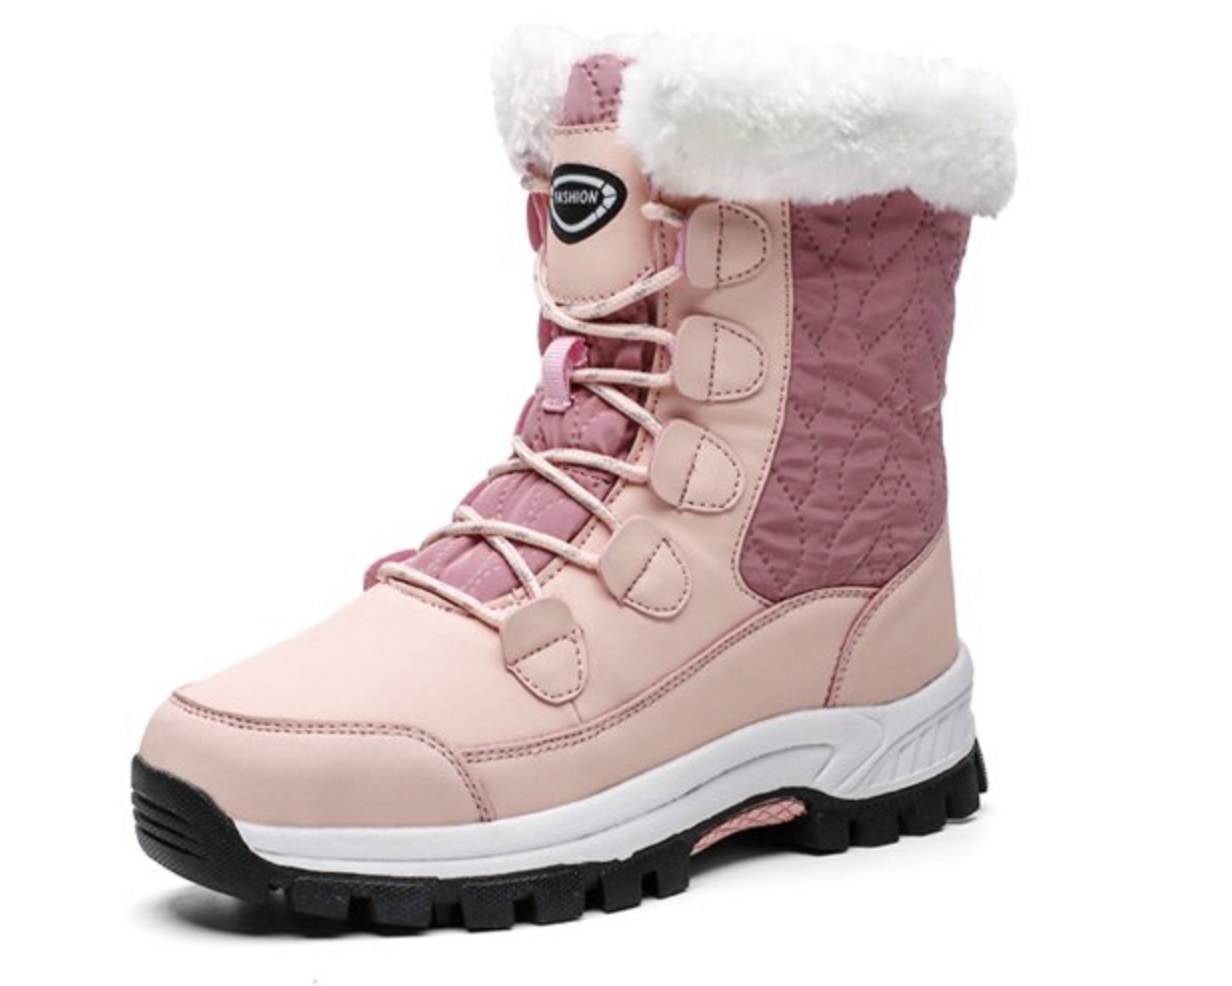 a pink snow boot with white faux fur lining